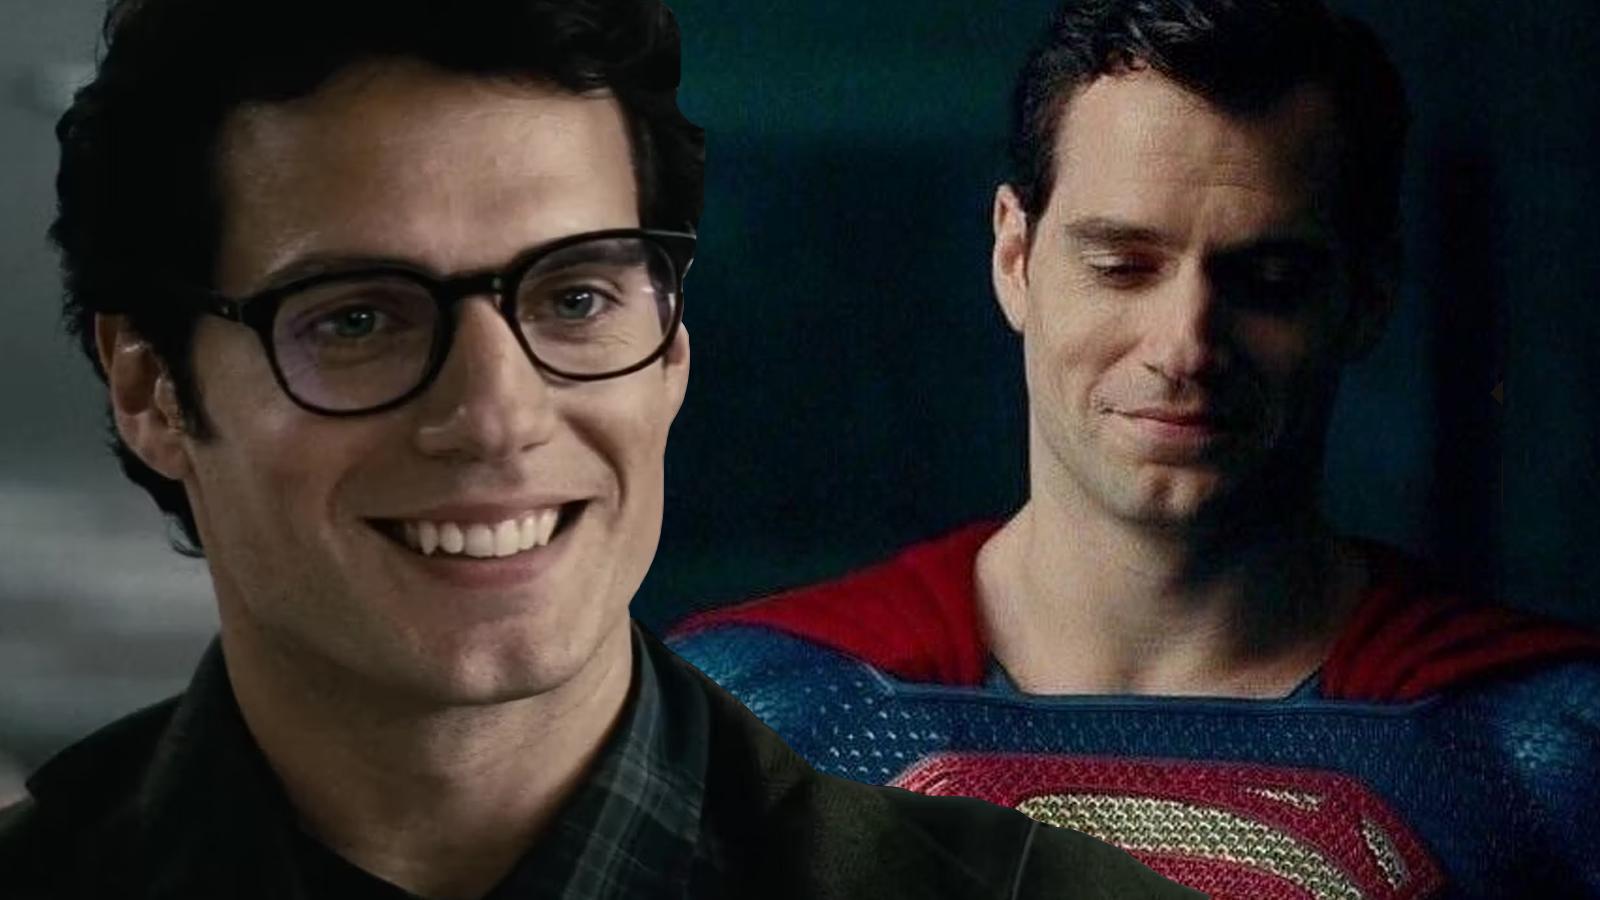 Man of Steel: Why it's Just Fine It's Not Called Superman